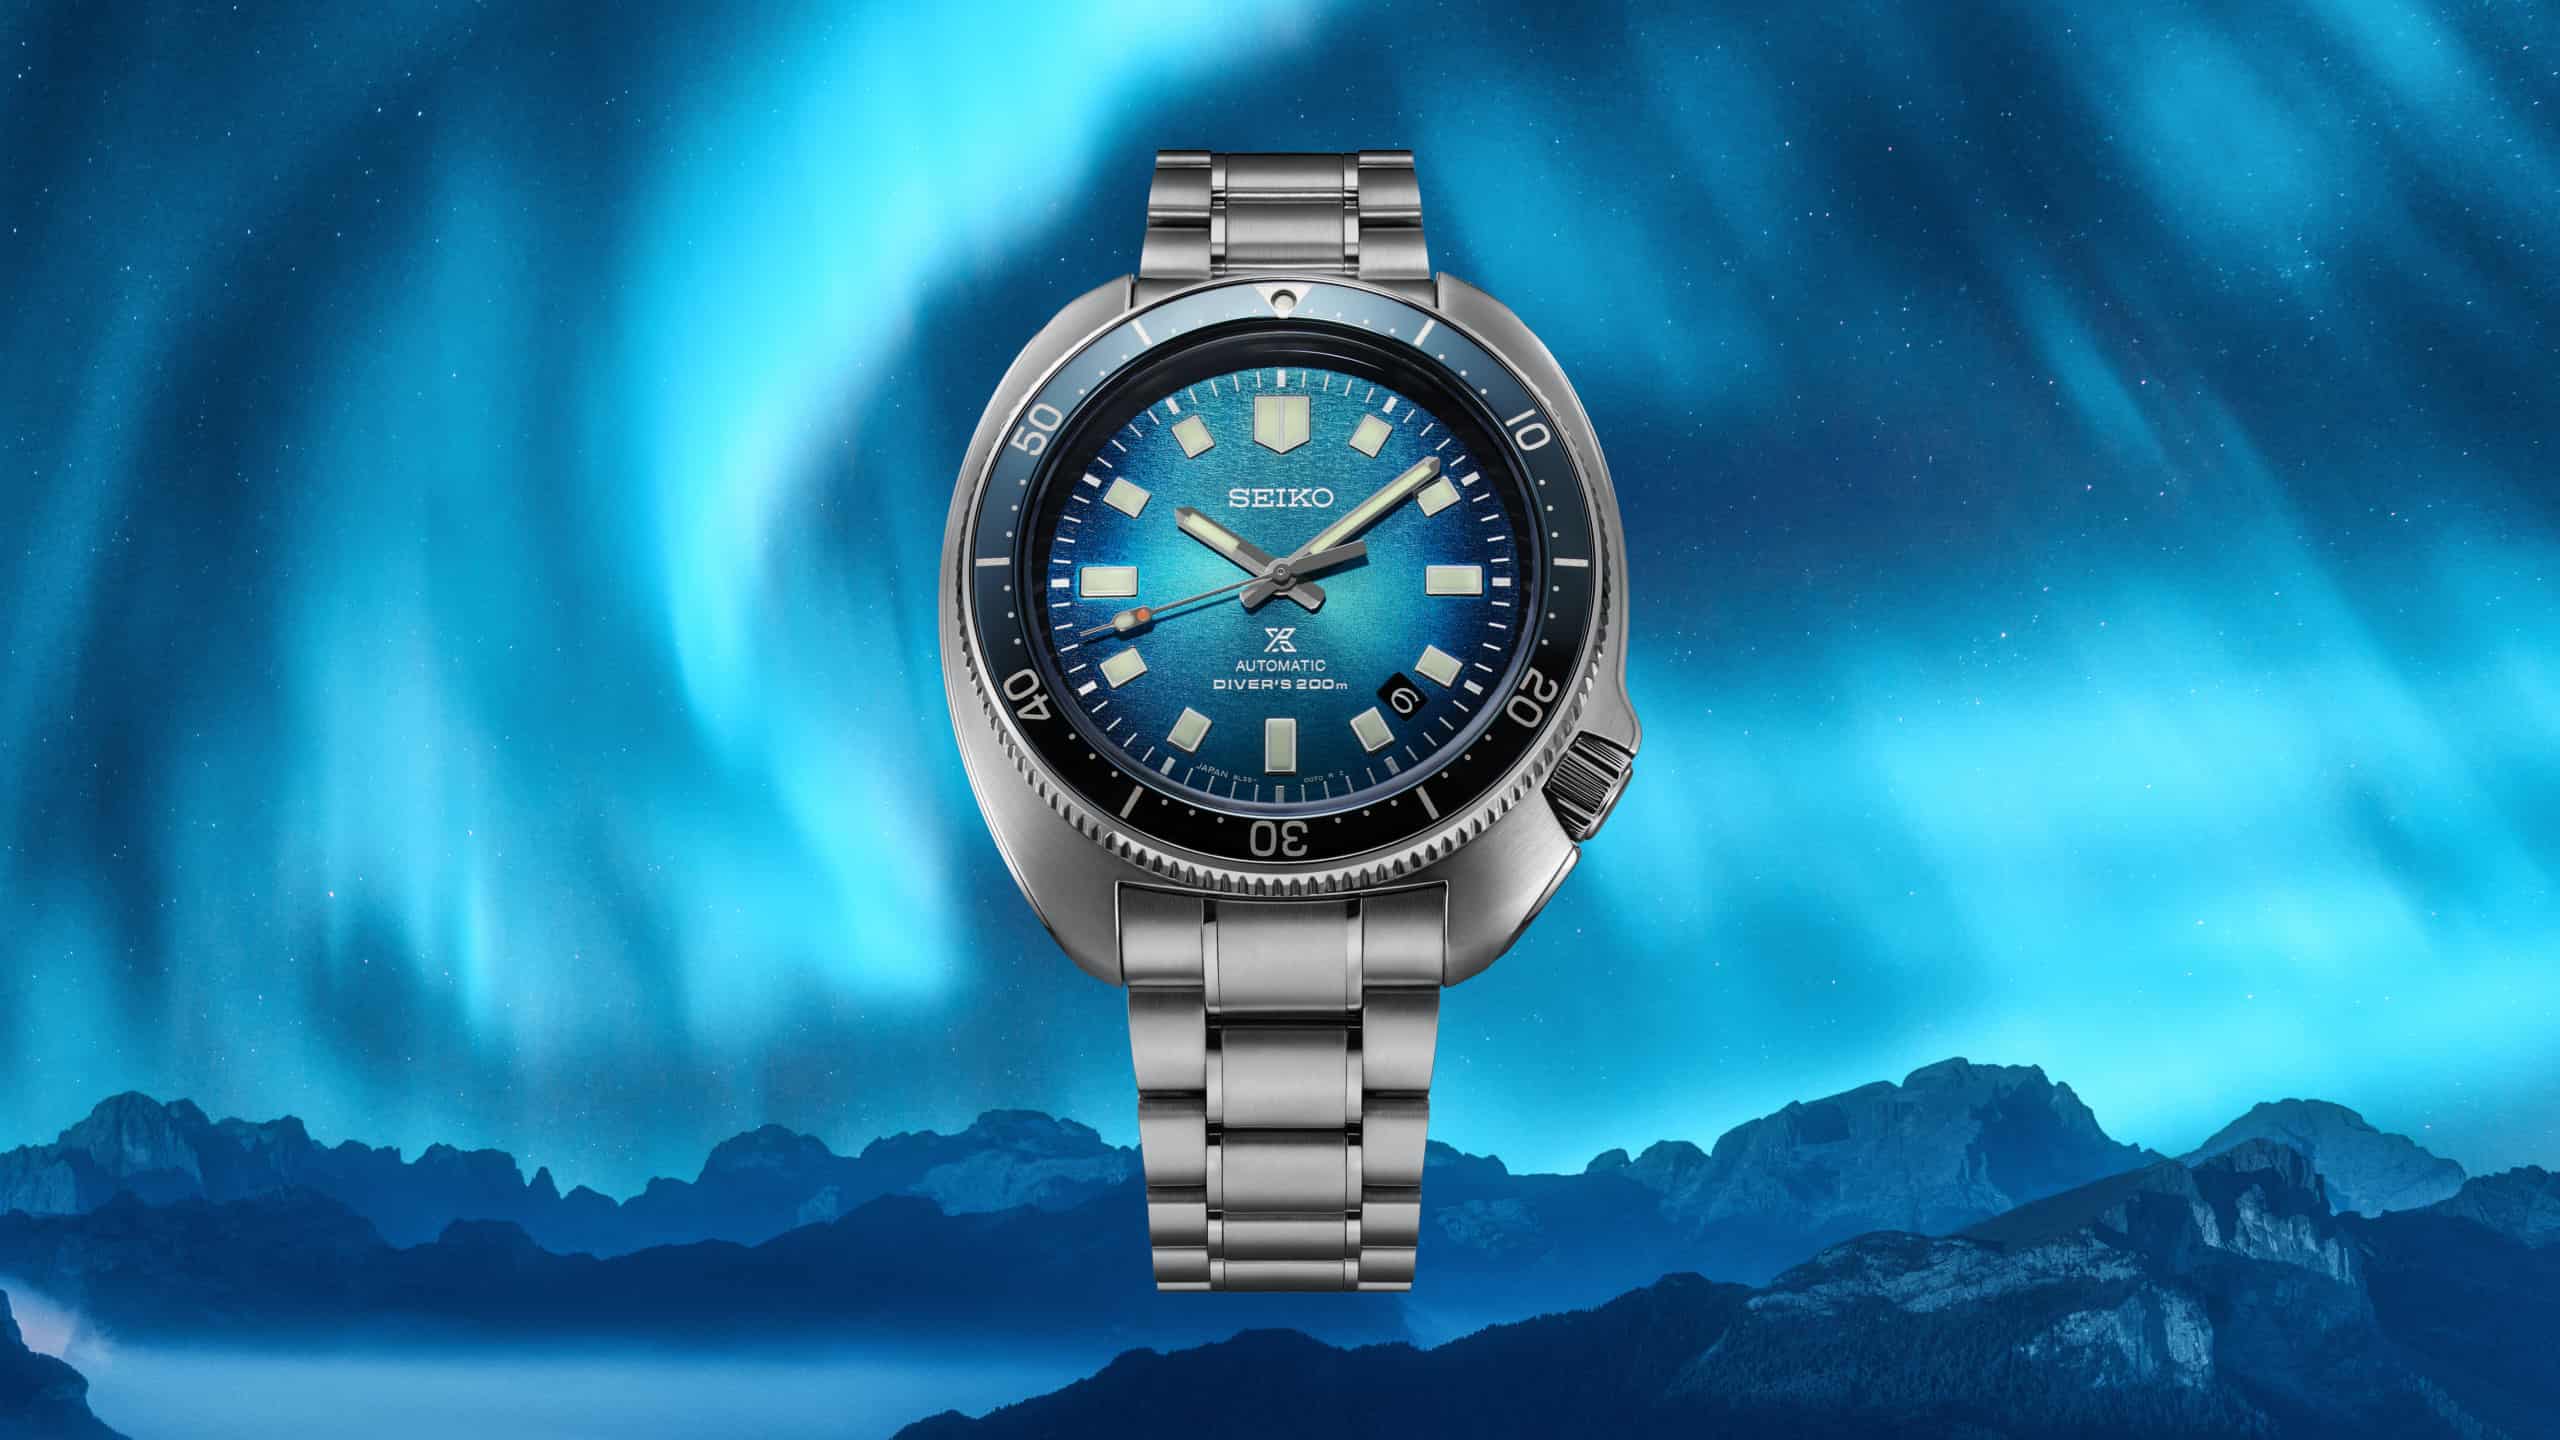 Seiko's Latest Limited Edition Draws Inspiration From The Northern Lights  With The SLA063 - Worn & Wound